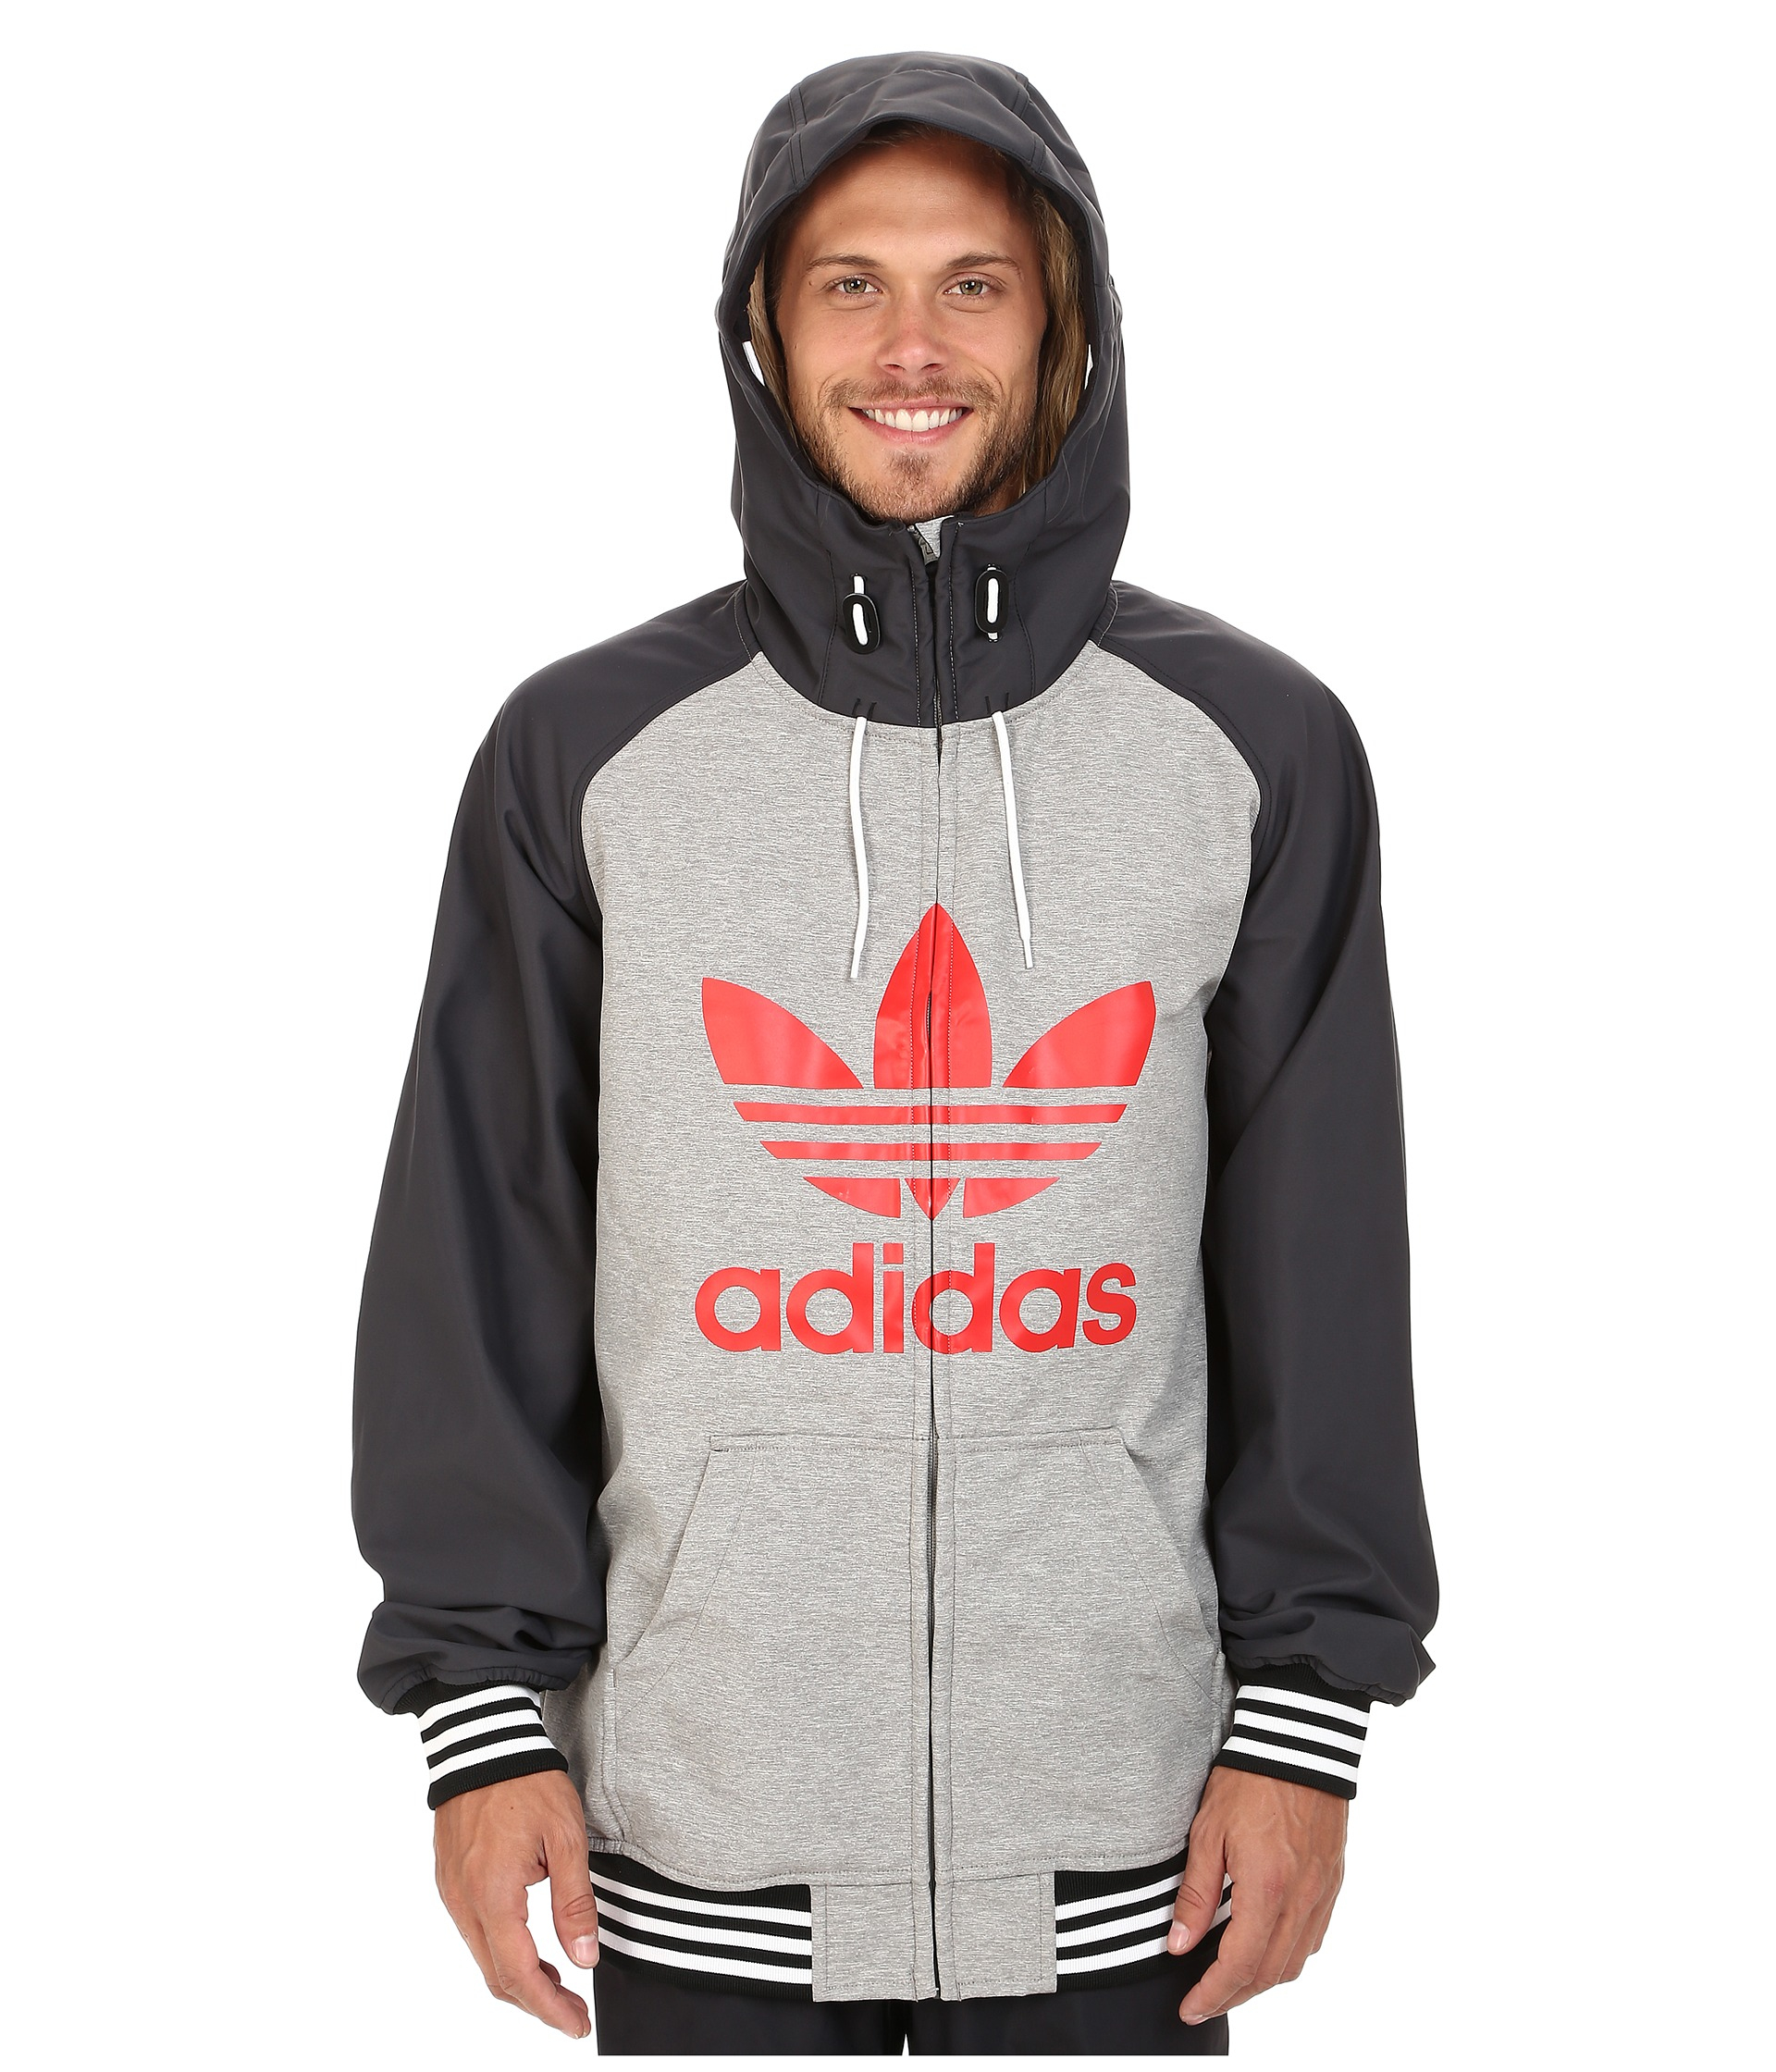 adidas Greeley Soft Shell Jacket in Carbon (Black) for Men - Lyst